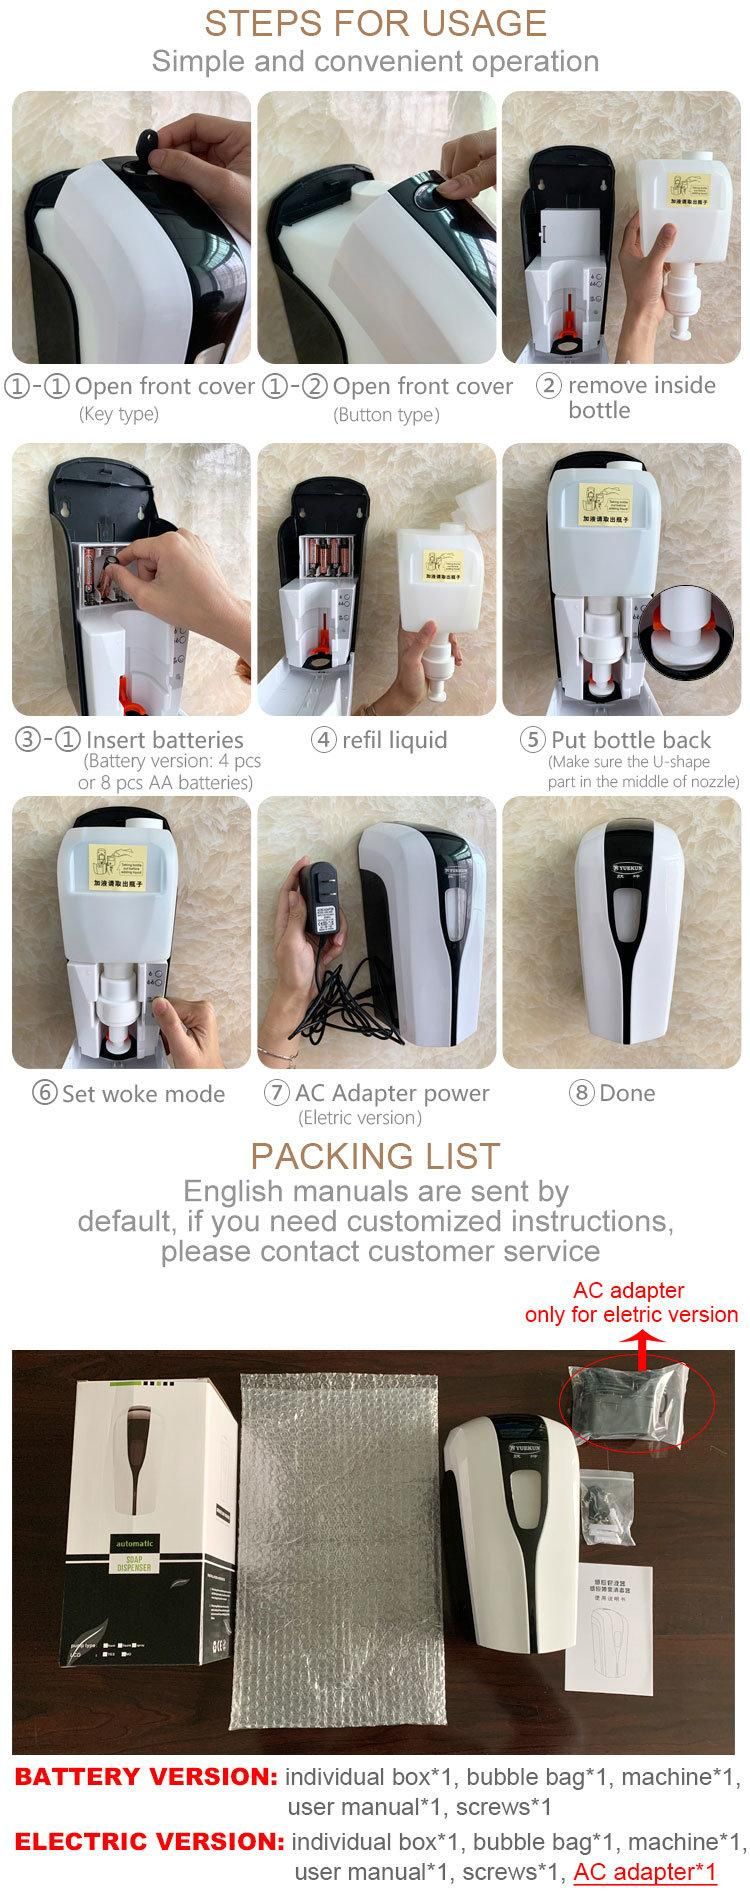 Plastic Material Wall Mount Touchless Hand Sanitizer Dispenser